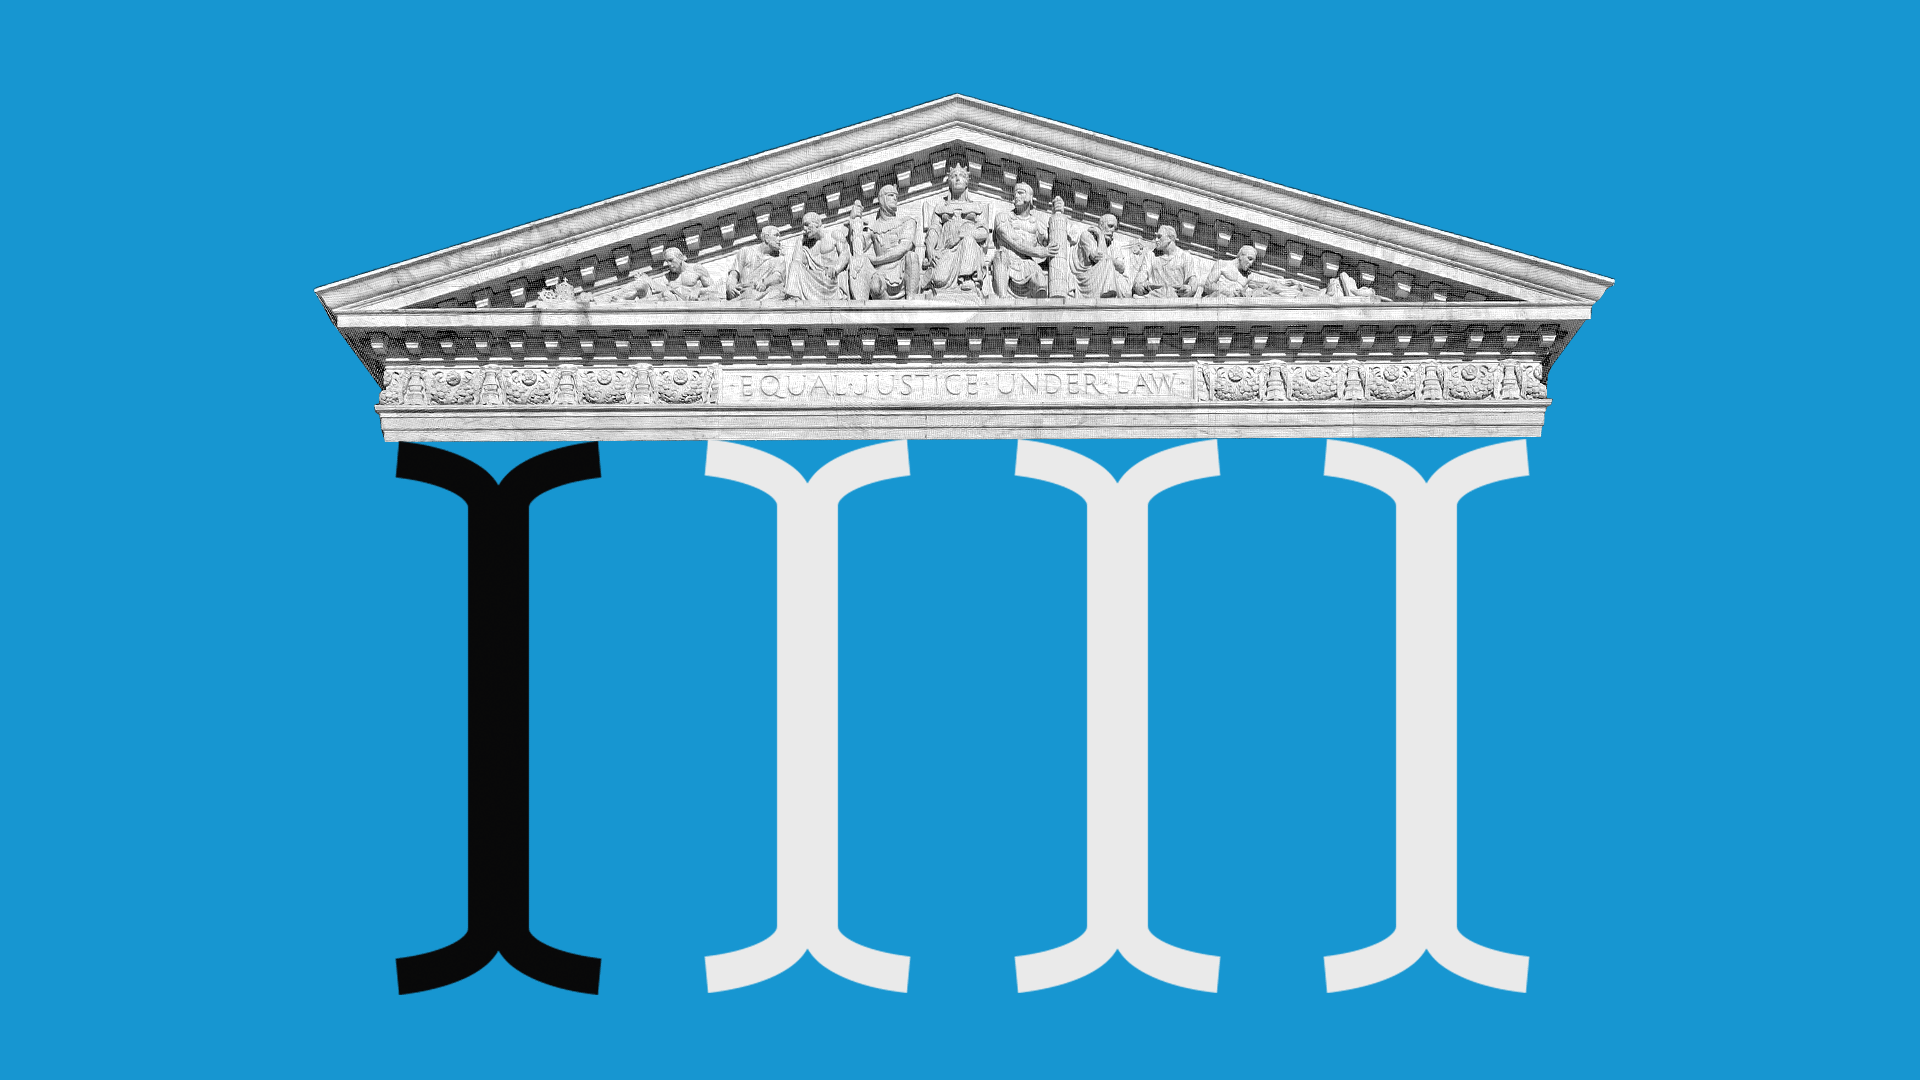 Animated illustration of the Supreme Court's columns as computer text cursors. 